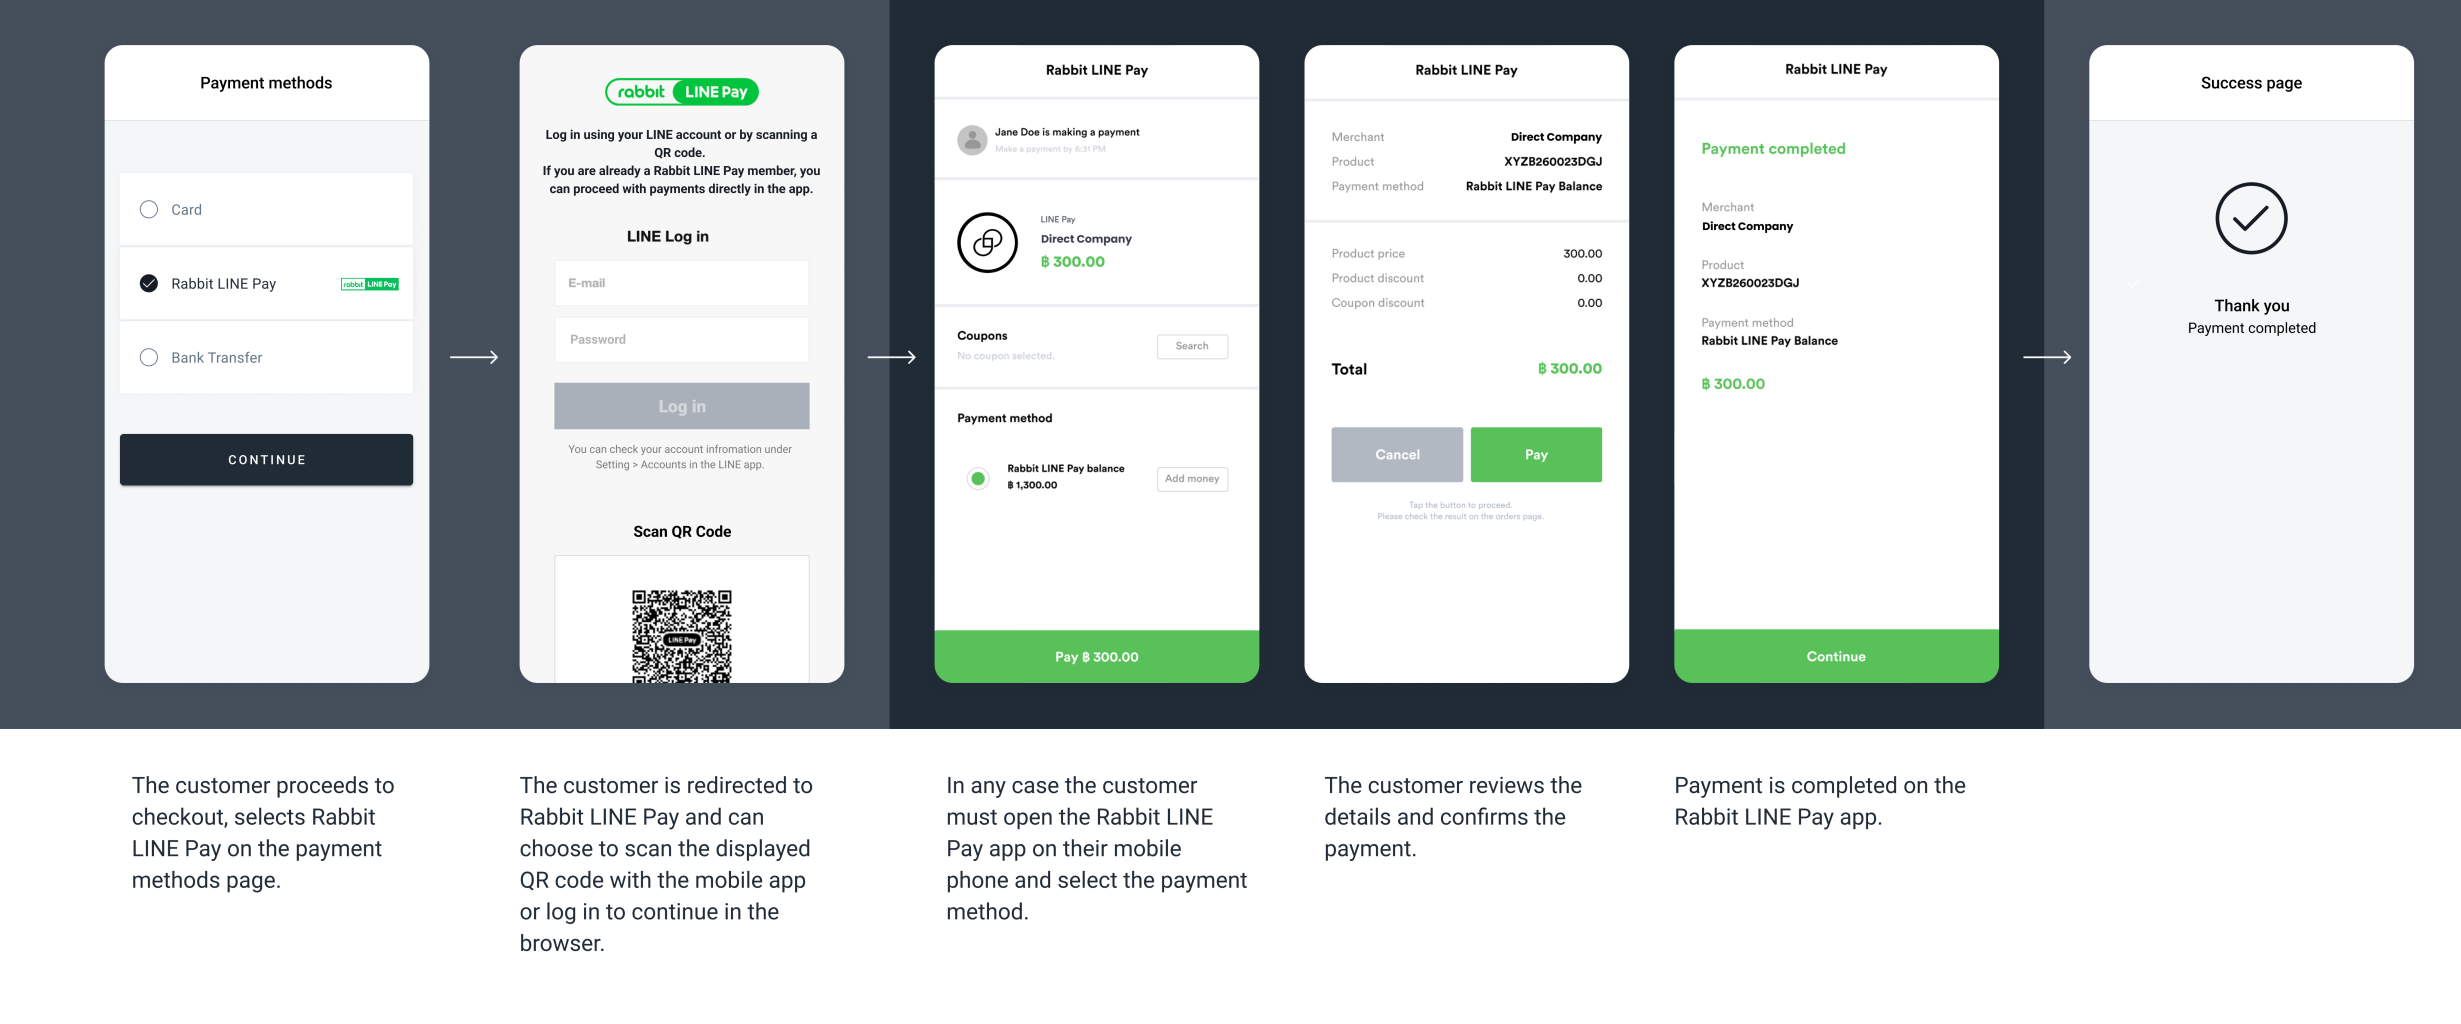 The screenshots illustrate a generic Rabbit LINE Pay redirect flow.